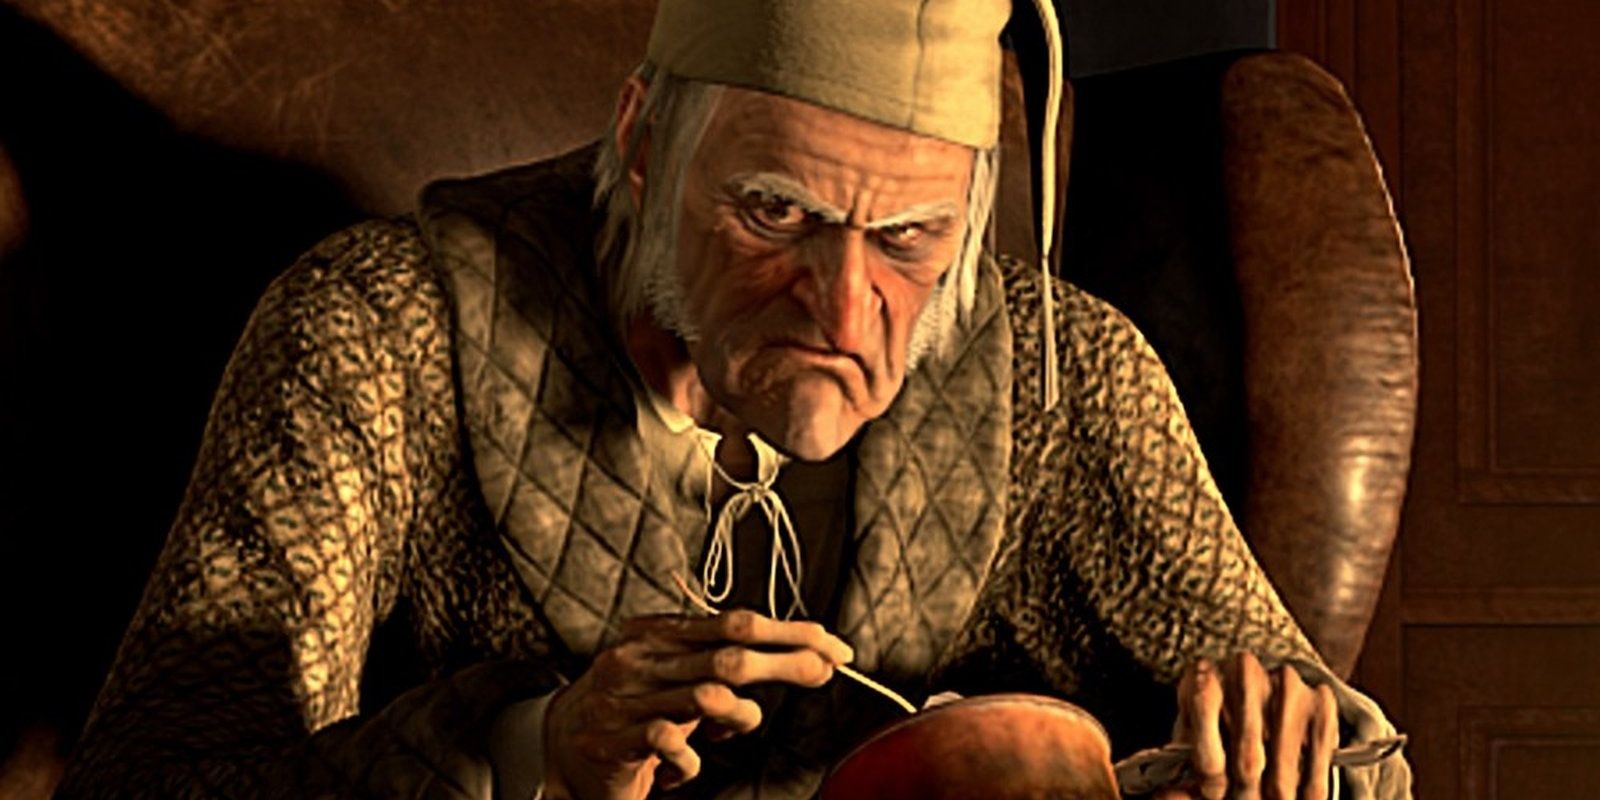 Ebenezer Scrooge looks angry in A Christmas Carol 2009